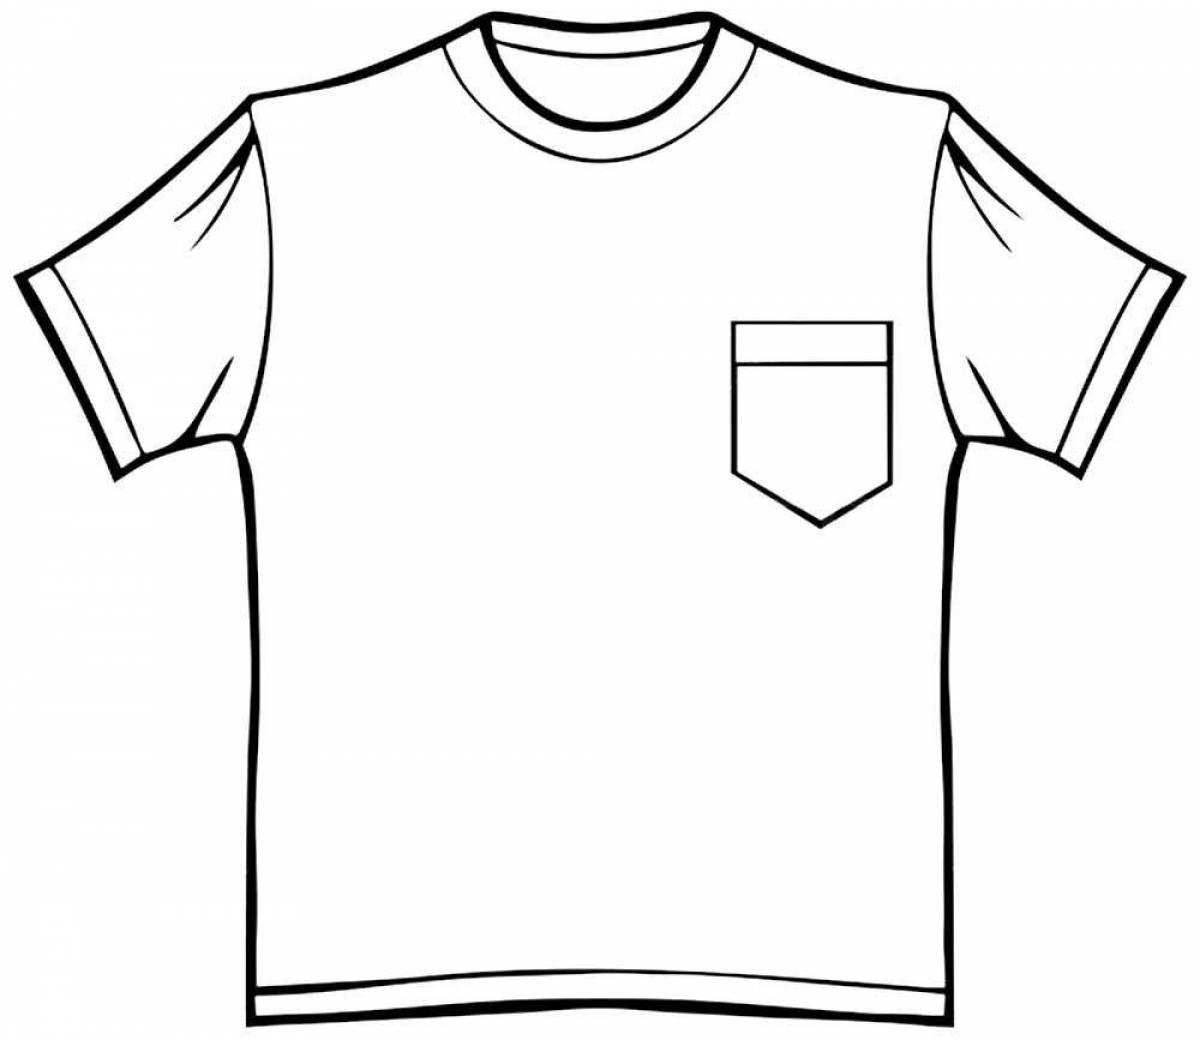 Colorful t-shirt coloring page for kids to explore